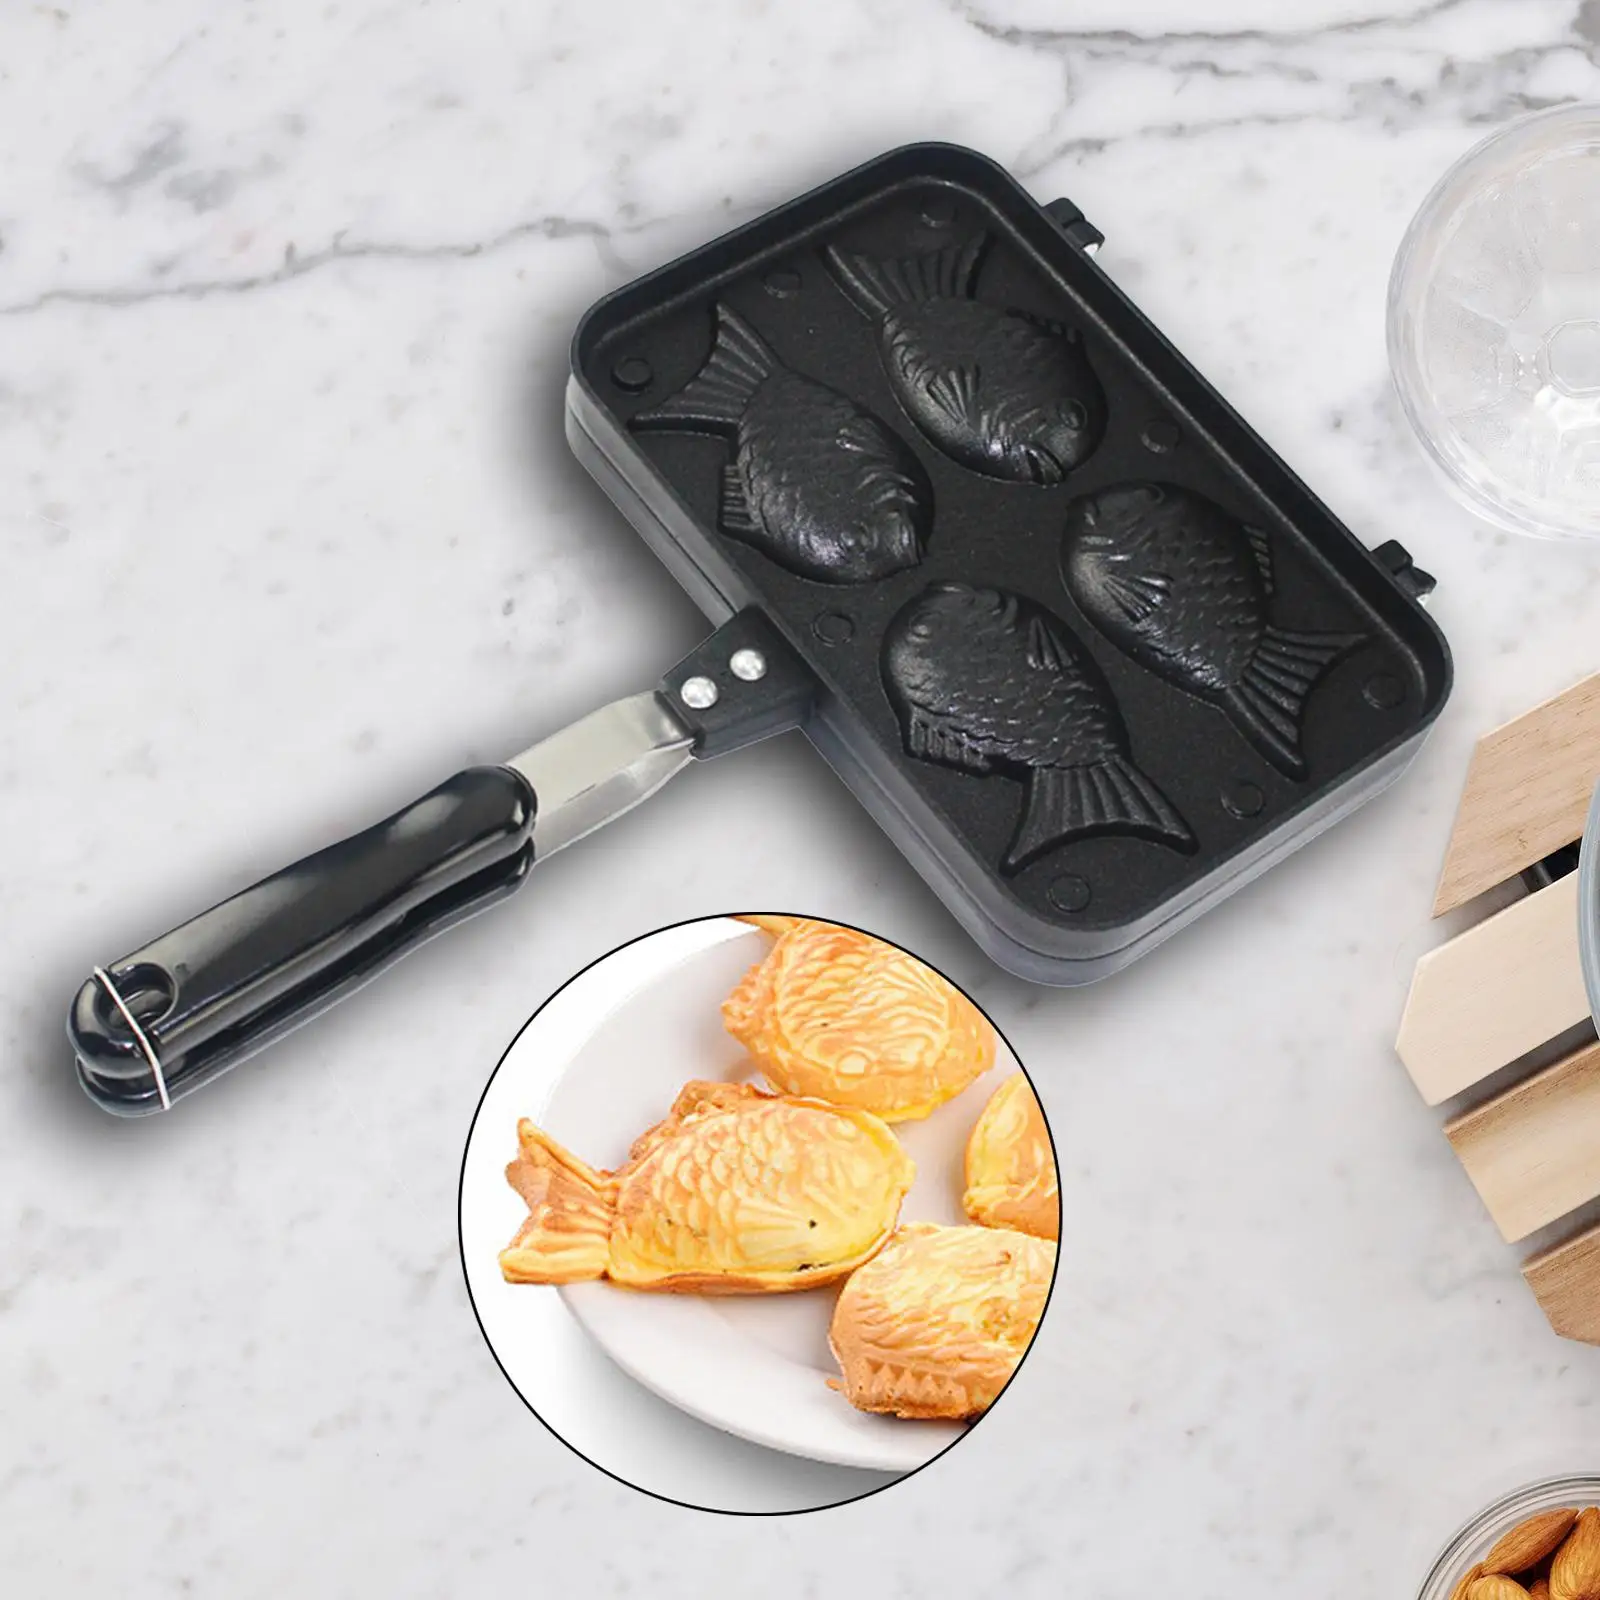 Household Taiyaki Bakeware Smooth Kitchen Gadgets Baking Maker Easy to Clean Double Sided Baking Tray Waffle Baking Pan for Home